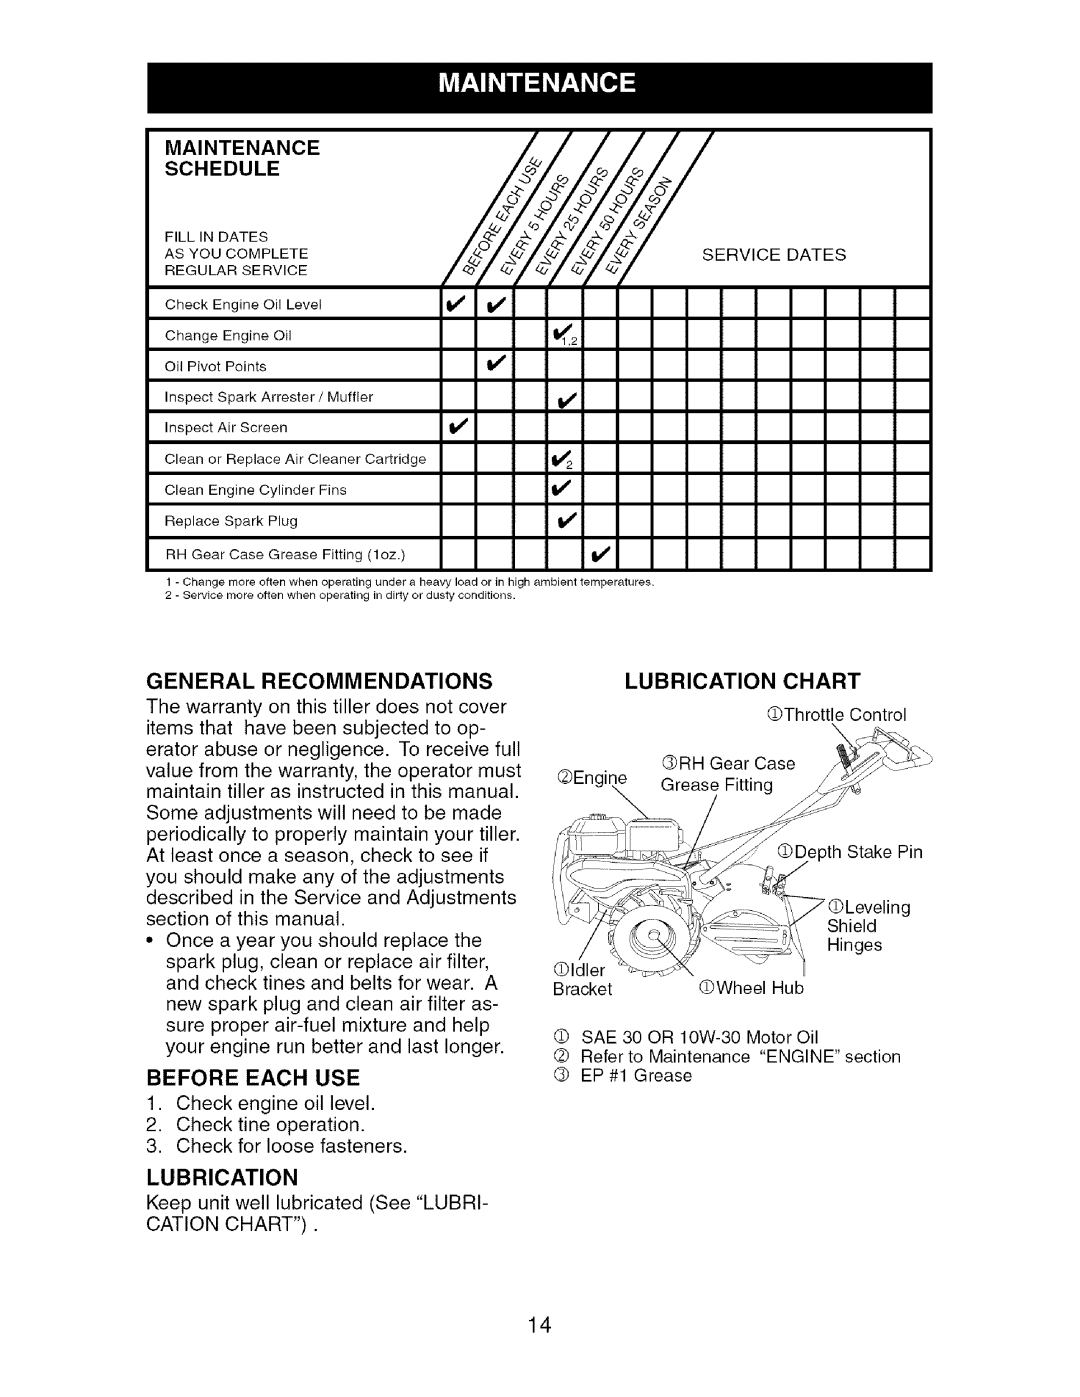 Craftsman 917.29604 owner manual Before Each Use, Maintenance Schedule, General Recommendations, Lubrication Chart 